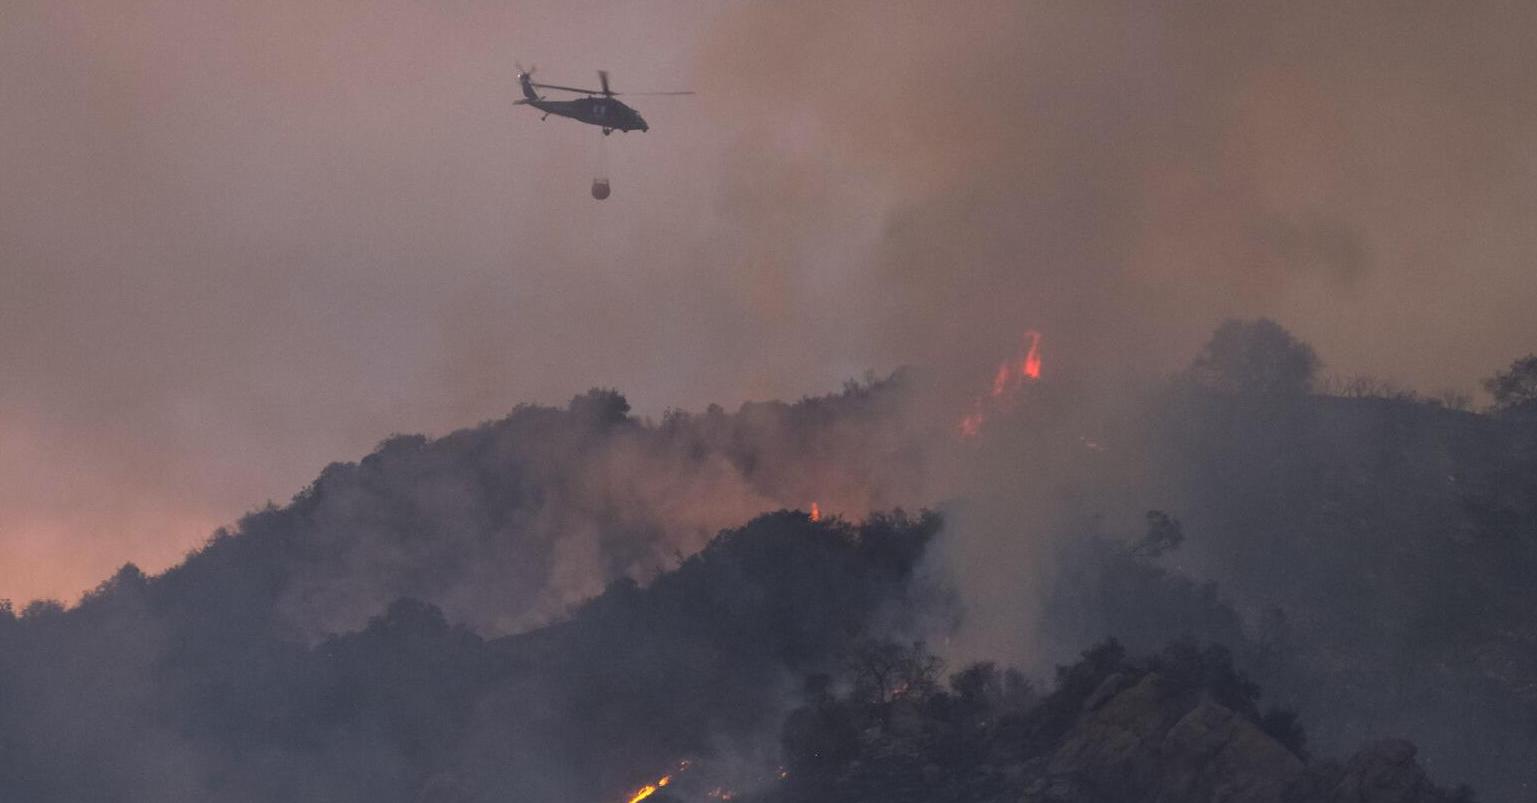 As Drought Intensifies, California Seeing More Wildfires